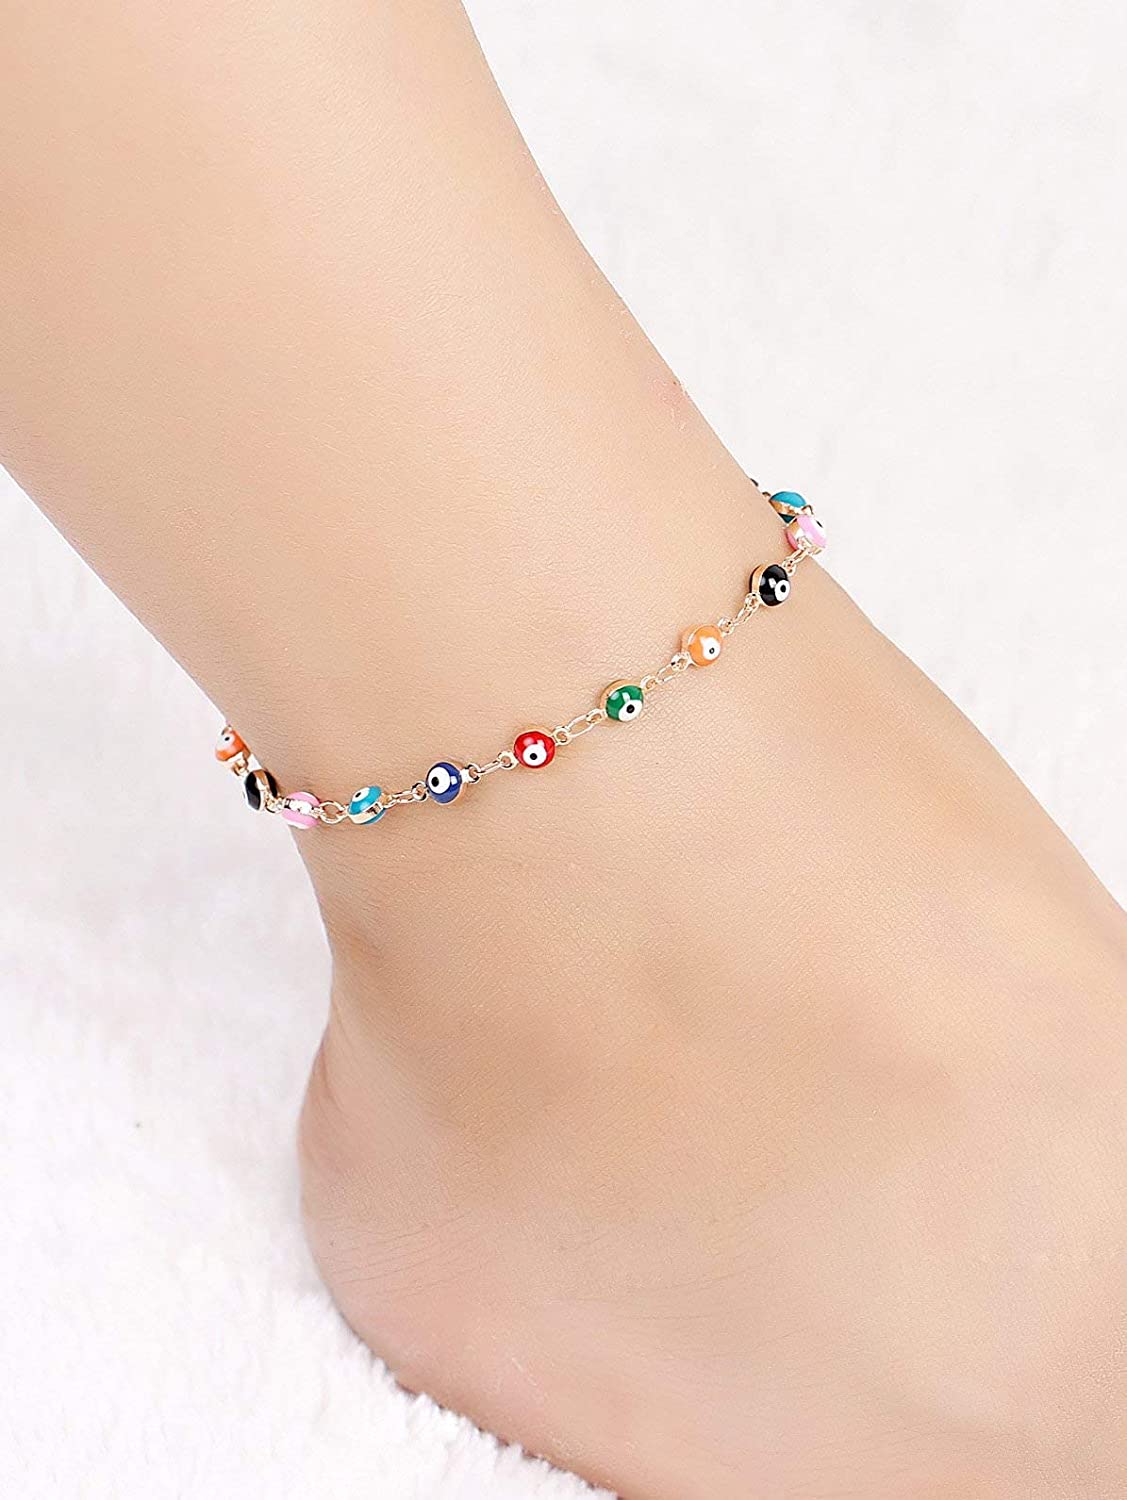 Costume Fashion Artifical Imitation Jewellery Devil Evil Eye Gold Chain Anklet Payal (1 PCS) for Girls and Women- Multicolor